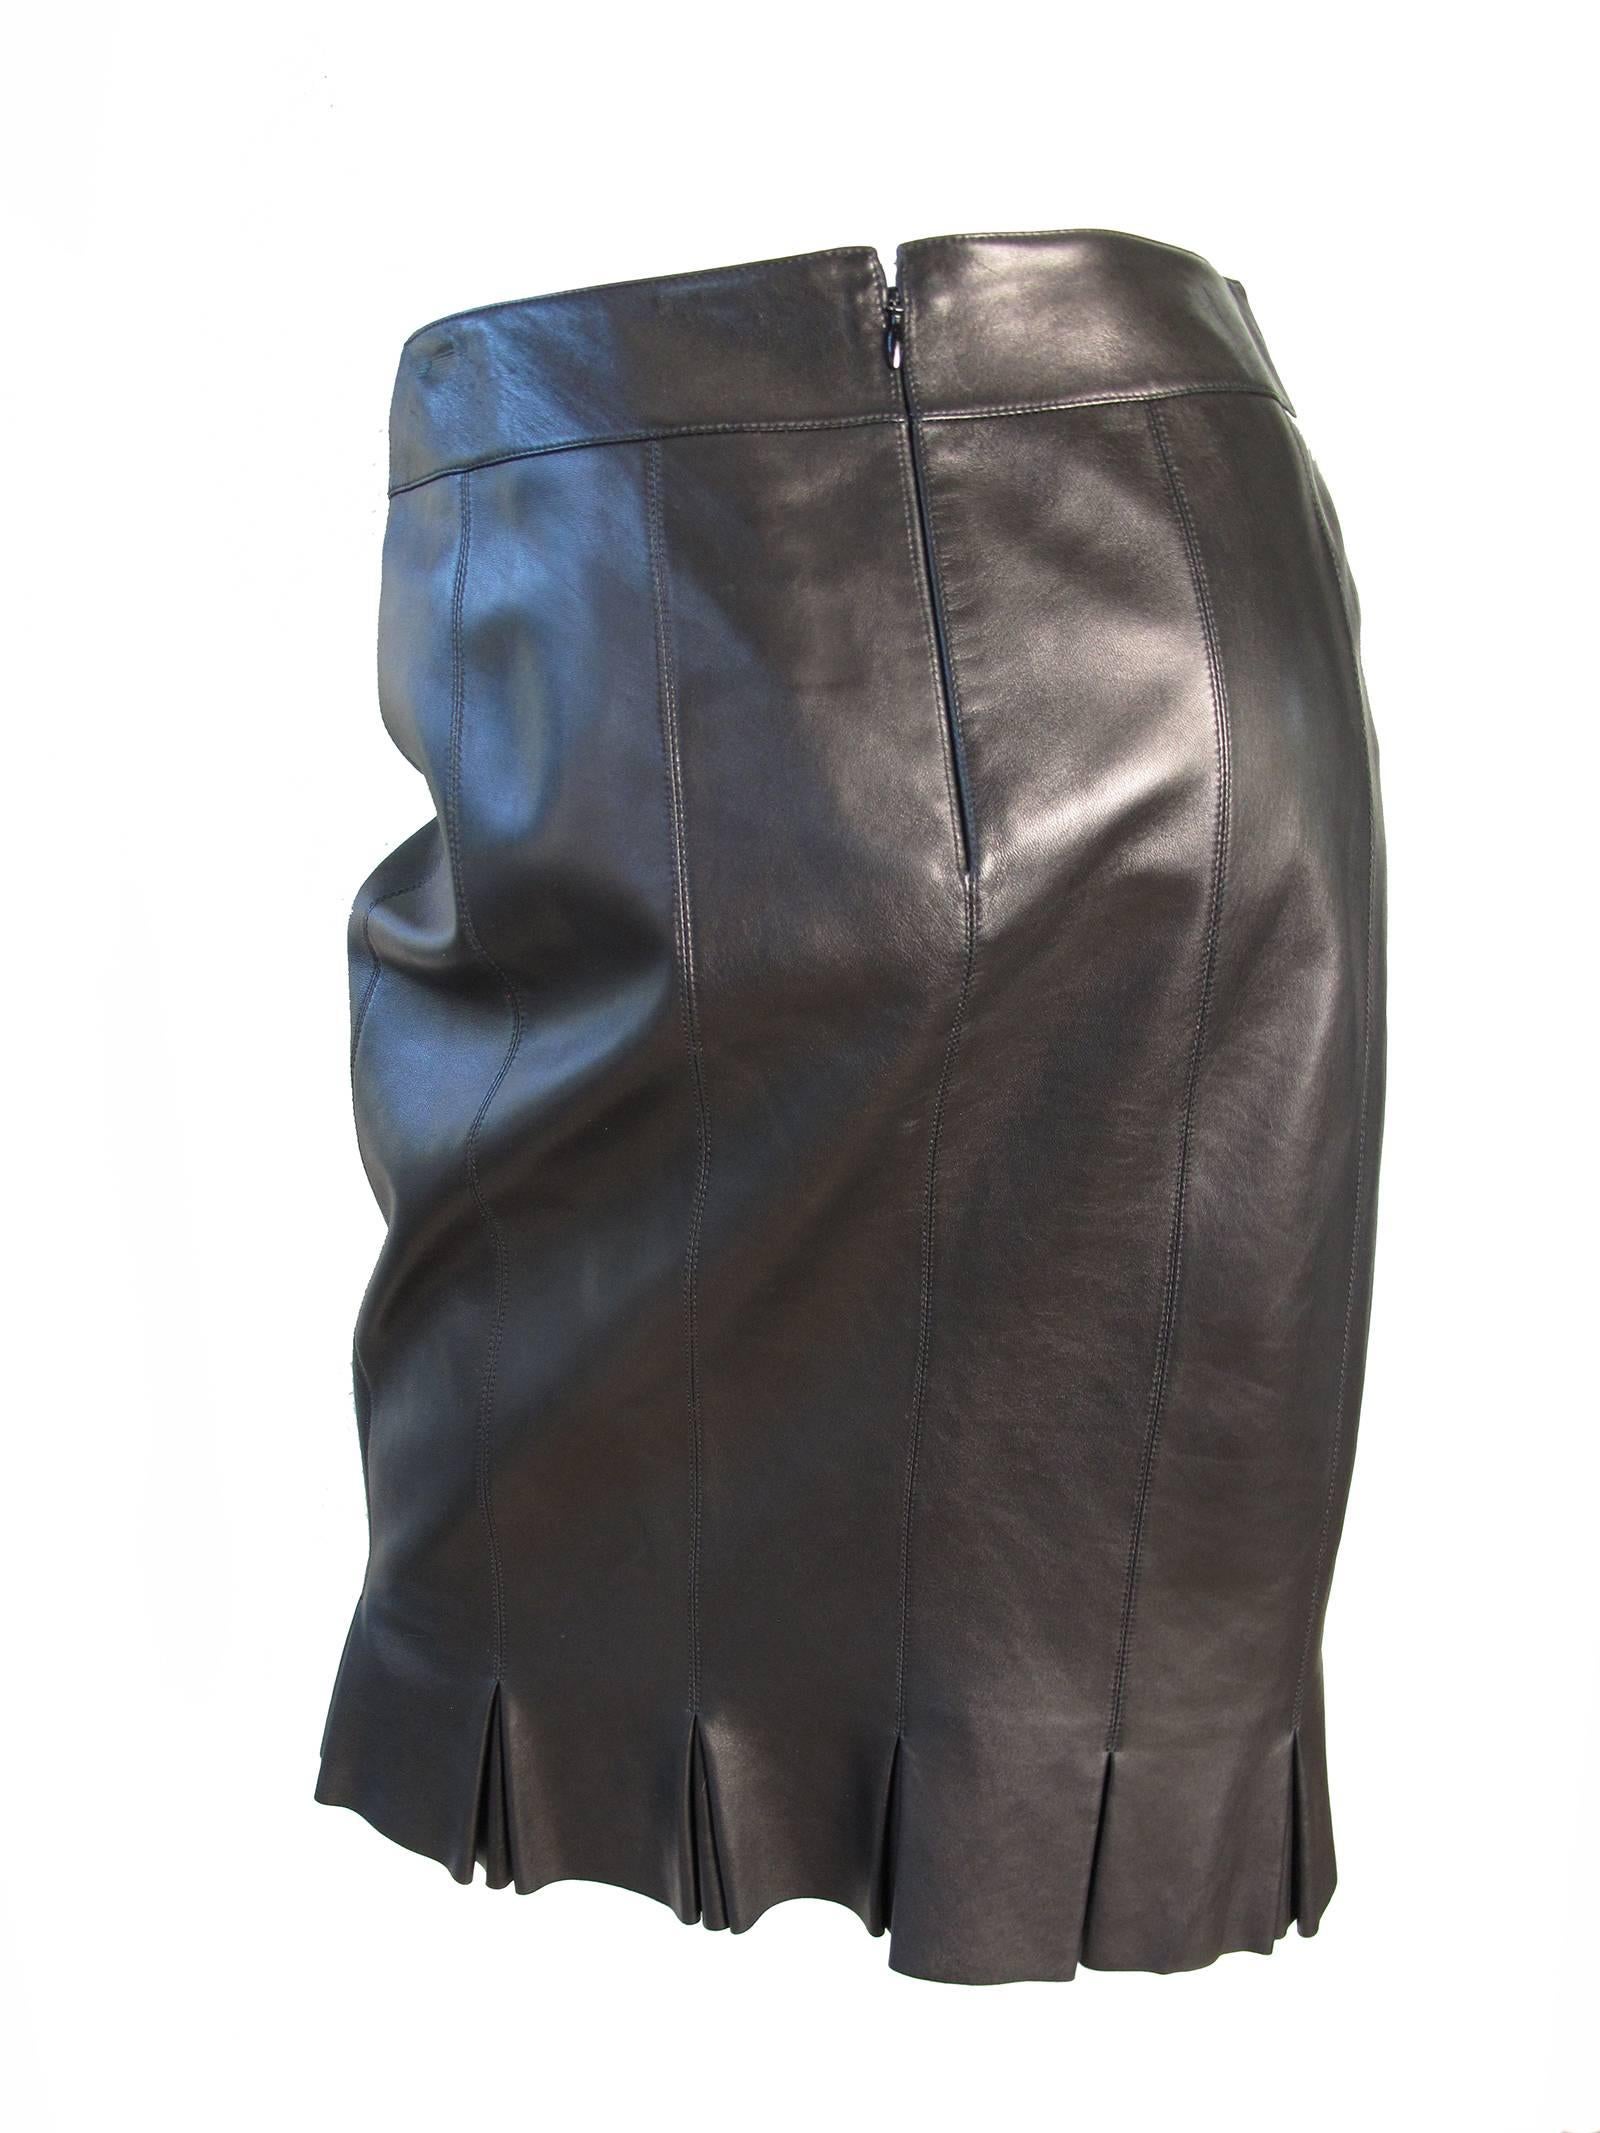 Chanel black leather skirt with pleated hem.  C. 2004. Condition: Very good. lambskin.  38
30